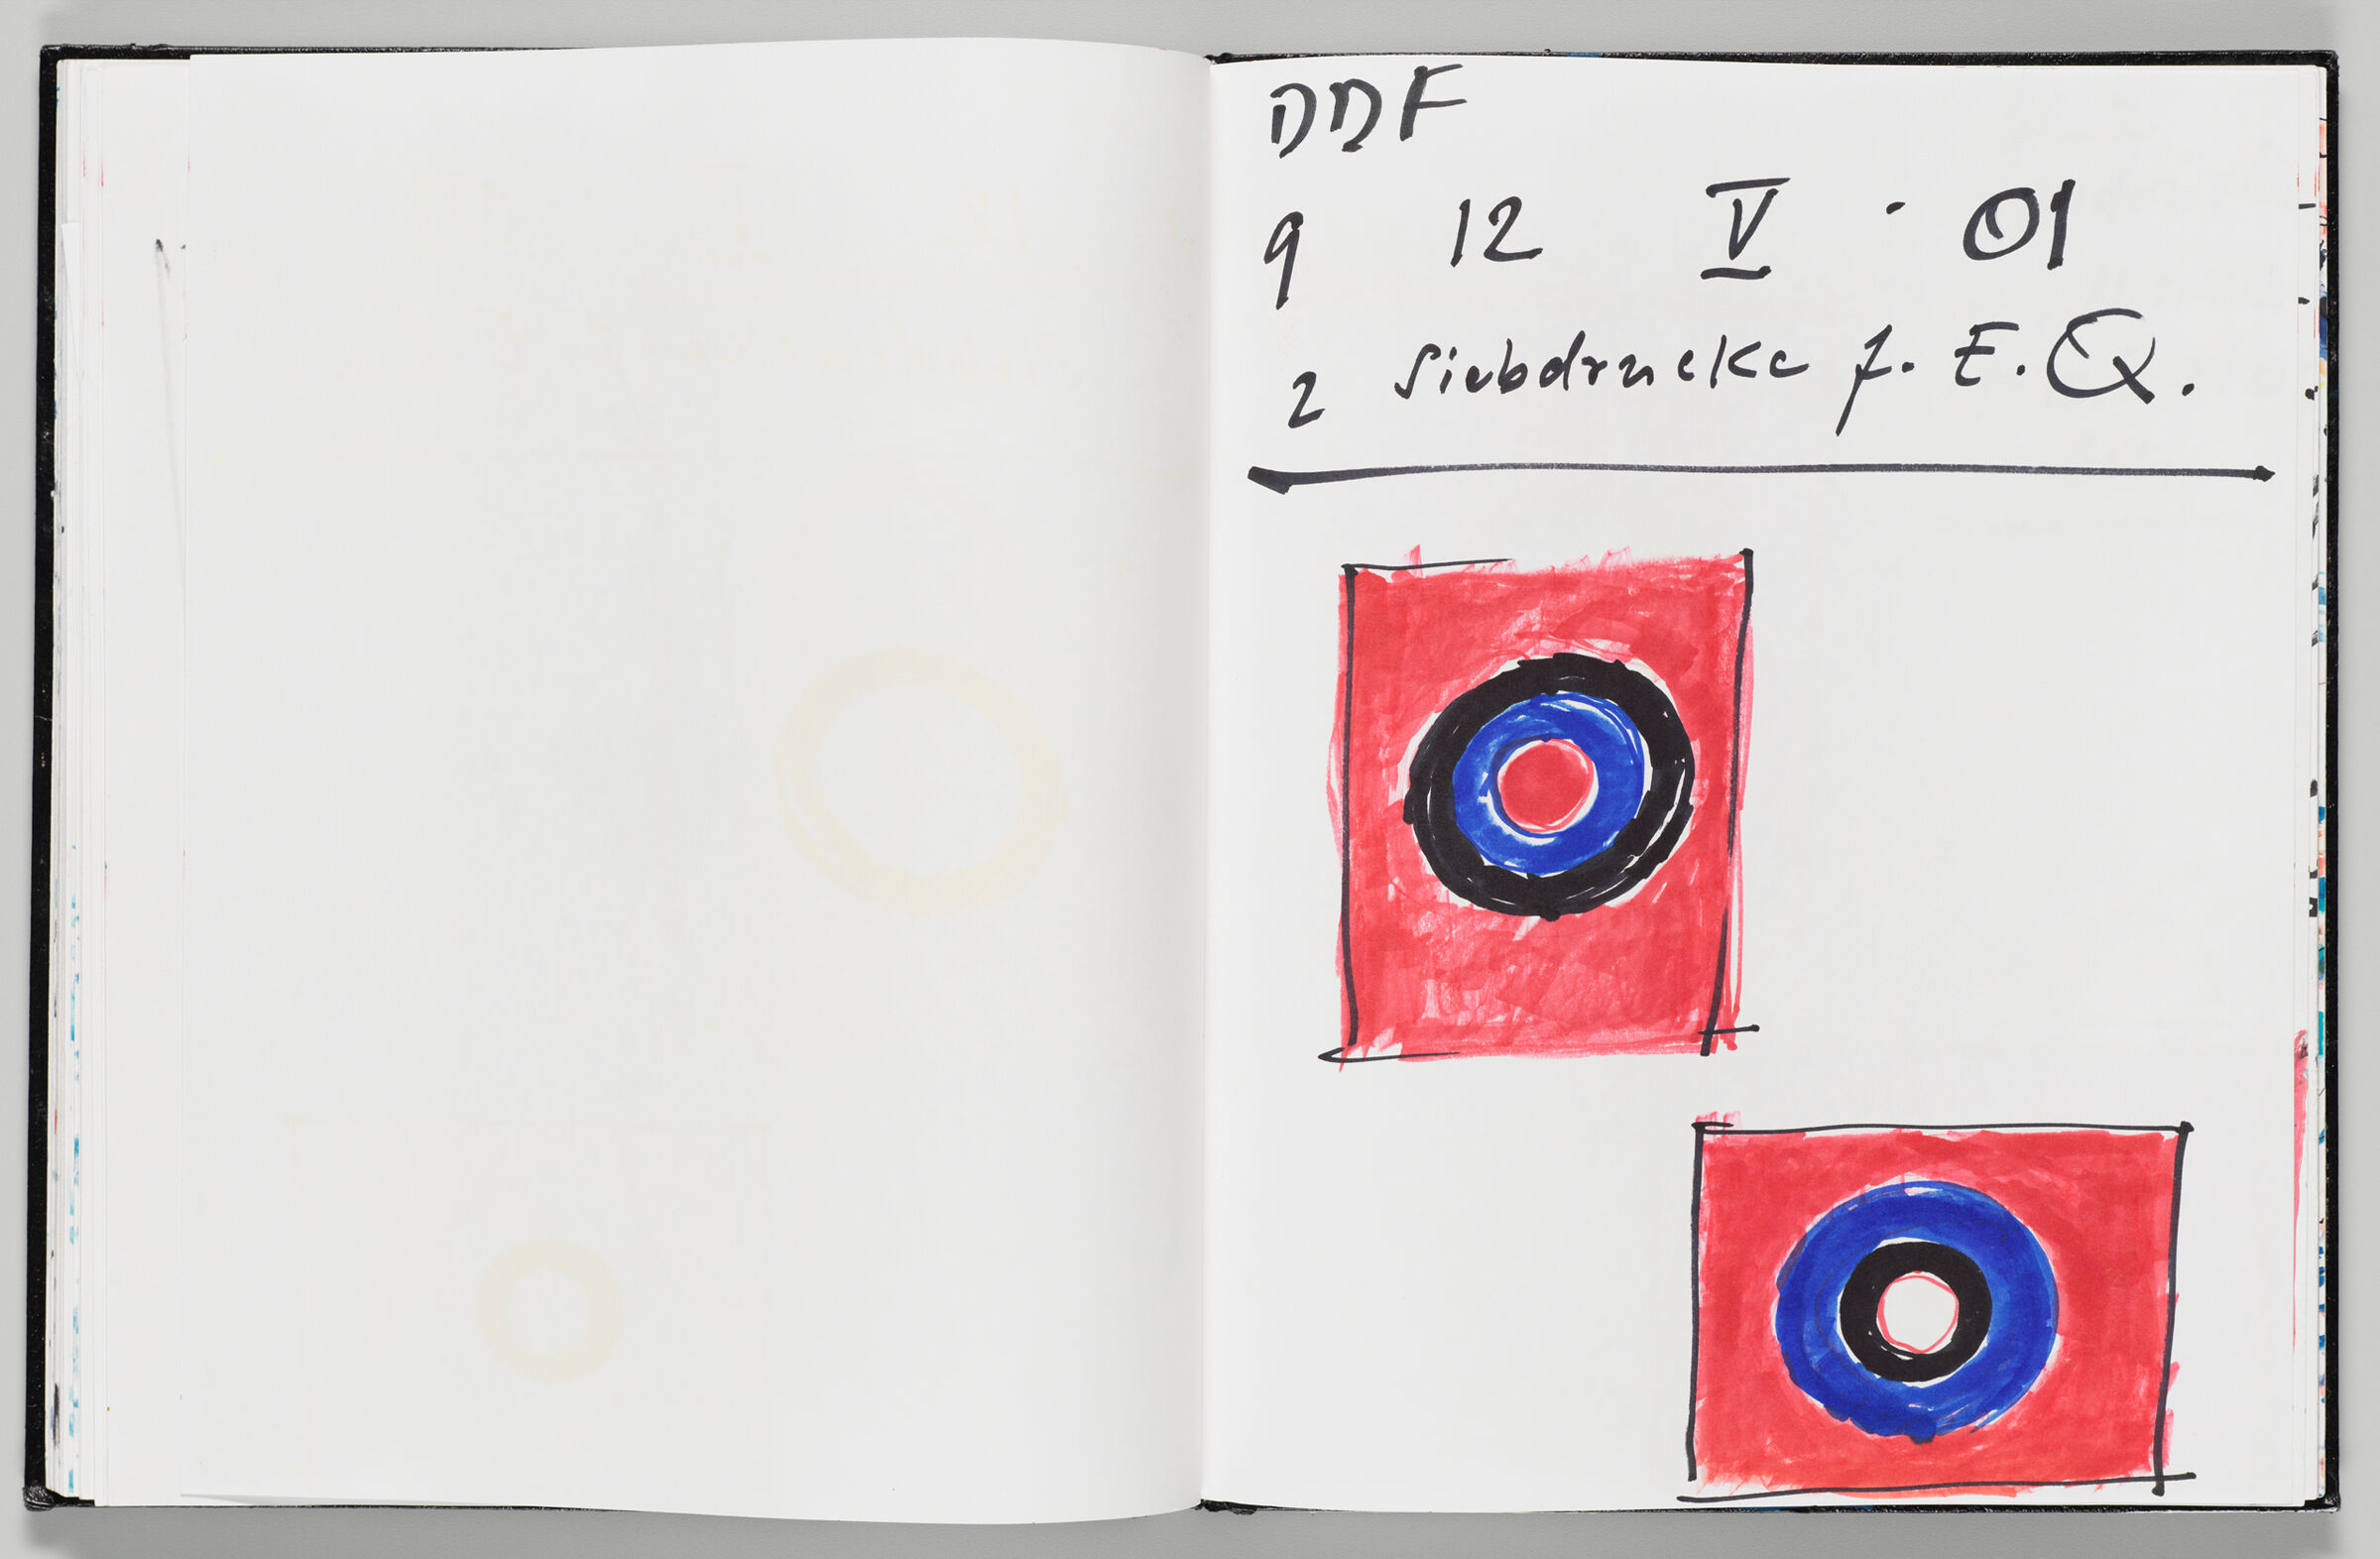 Untitled (Blank, Left Page); Untitled (Designs For Silkscreen Prints, Right Page)